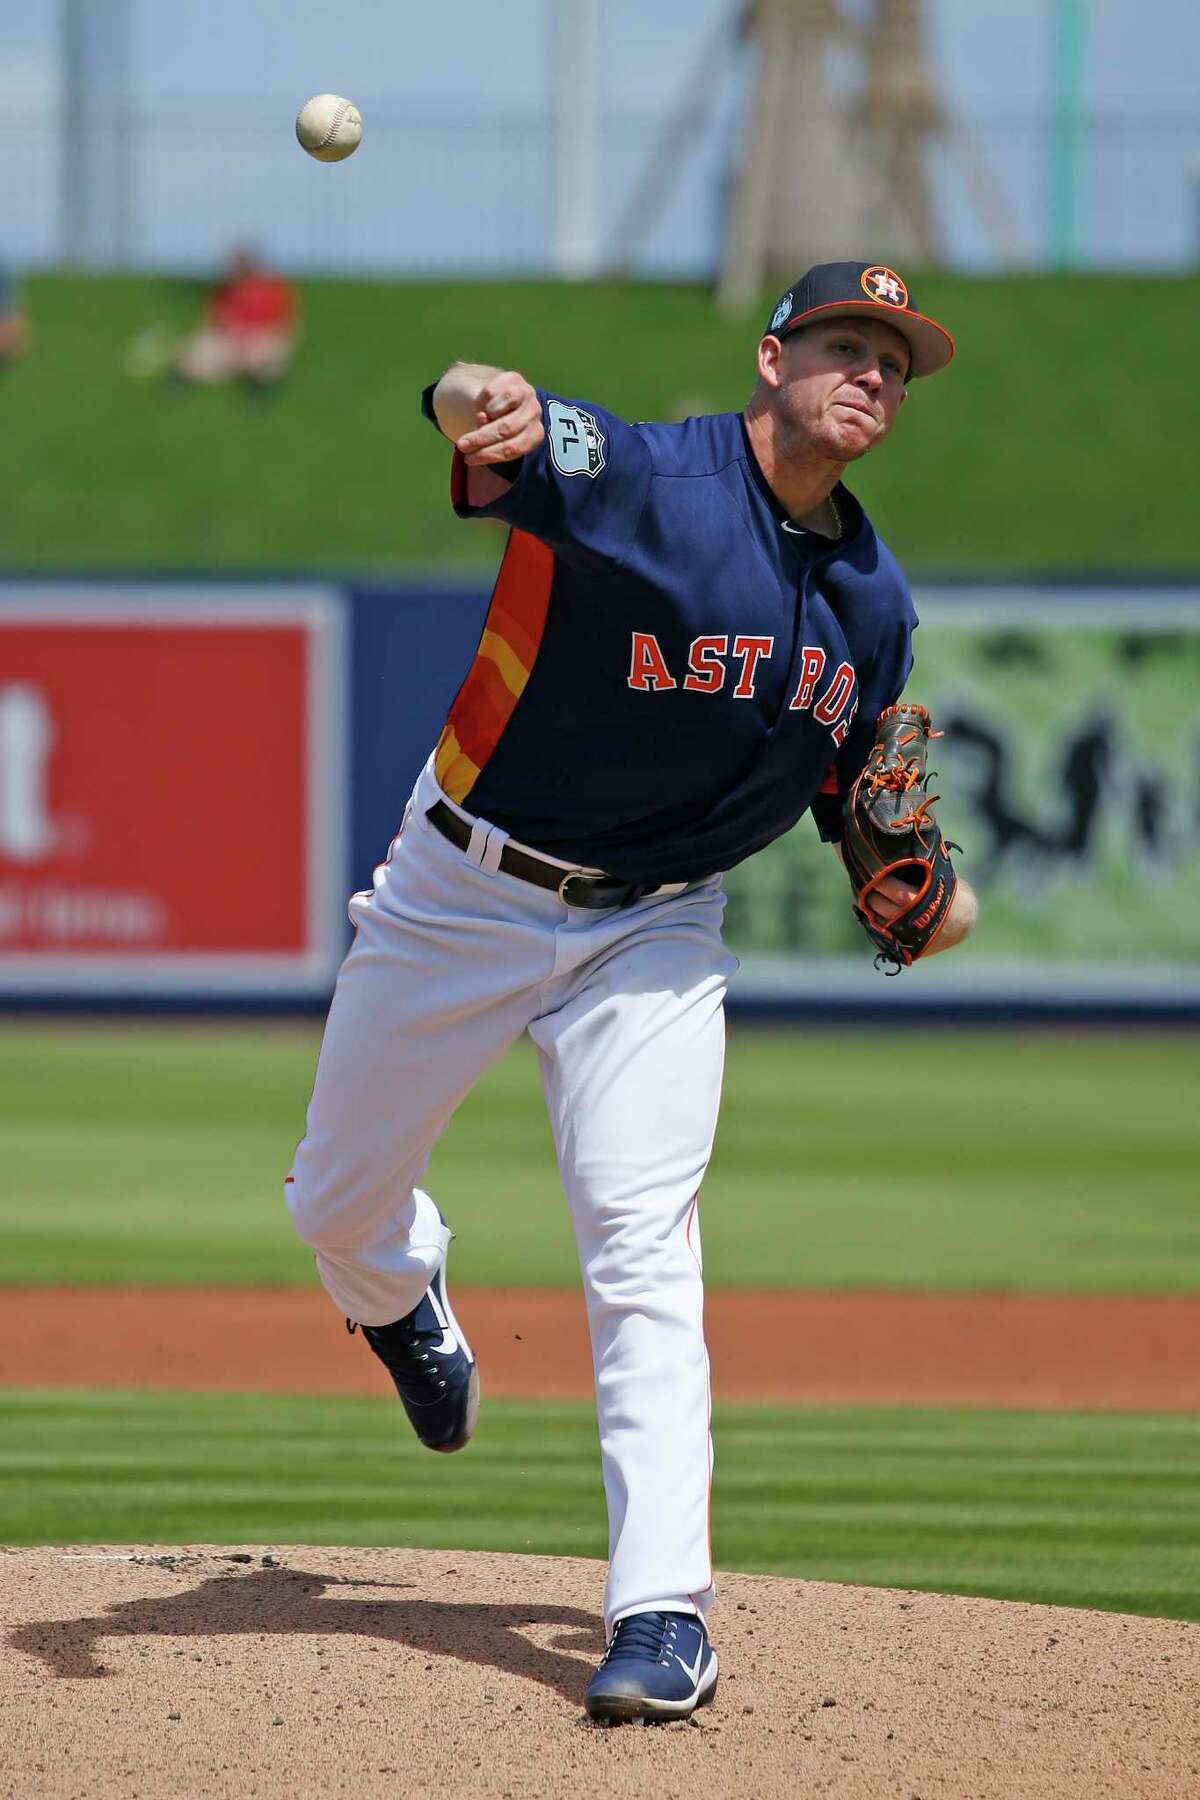 WEST PALM BEACH, FL - MARCH 6: Chris Devenski #47 of the Houston Astros throw the ball against the Boston Red Sox in the first inning during a spring training game at The Ballpark of the Palm Beaches on March 6, 2017 in West Palm Beach, Florida. The Astros and Red Sox played to a 5-5 tie.